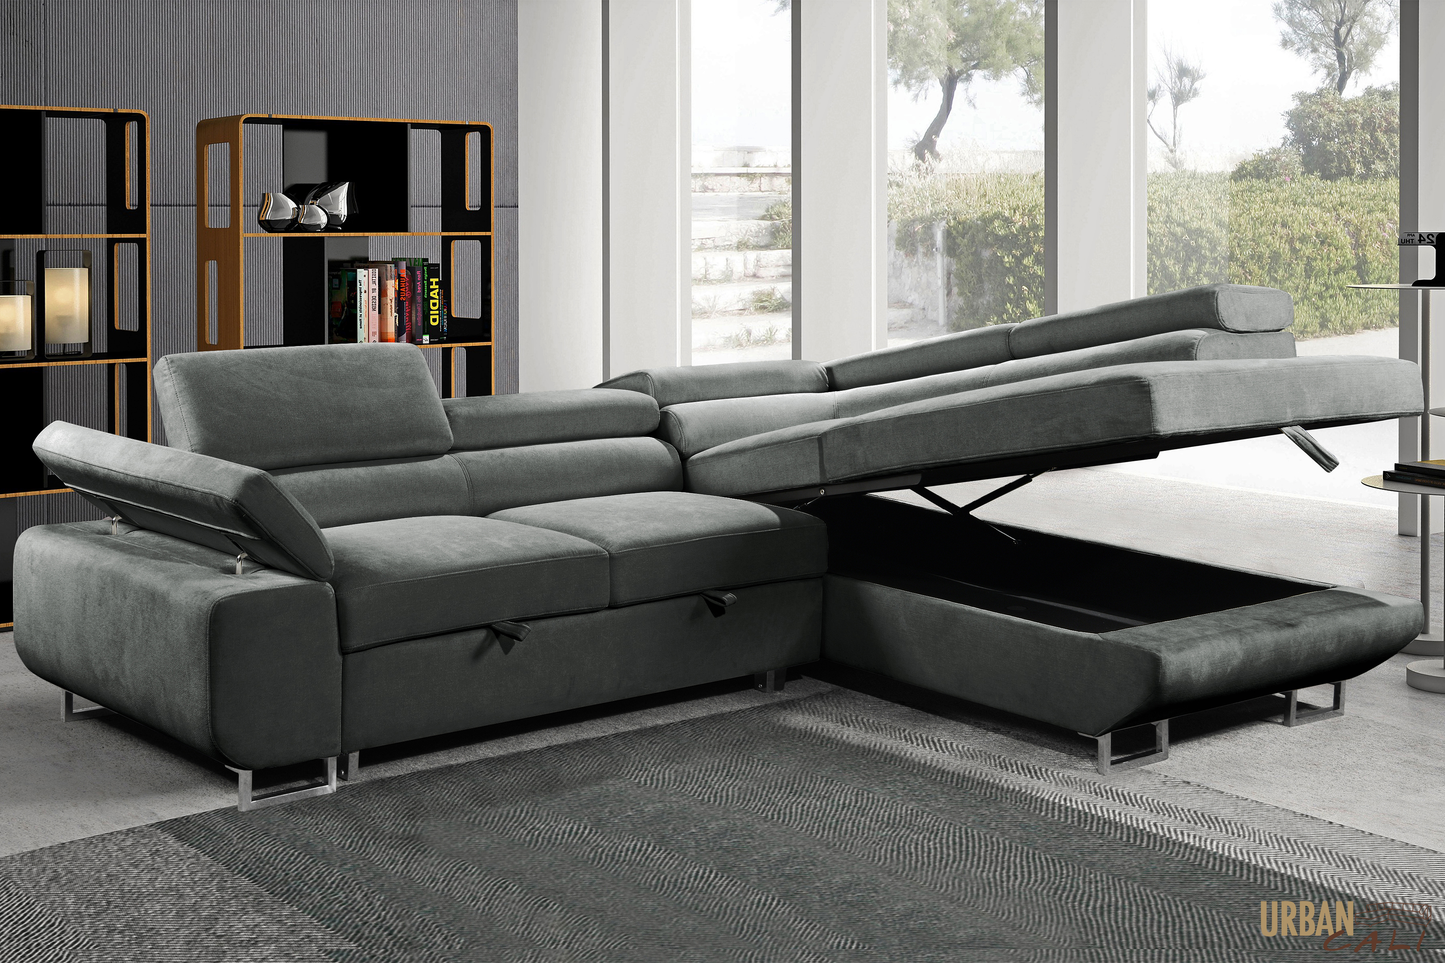 Hollywood Sleeper Sectional Sofa Bed with Adjustable Headrests and Storage Chaise - Available in 2 Colours